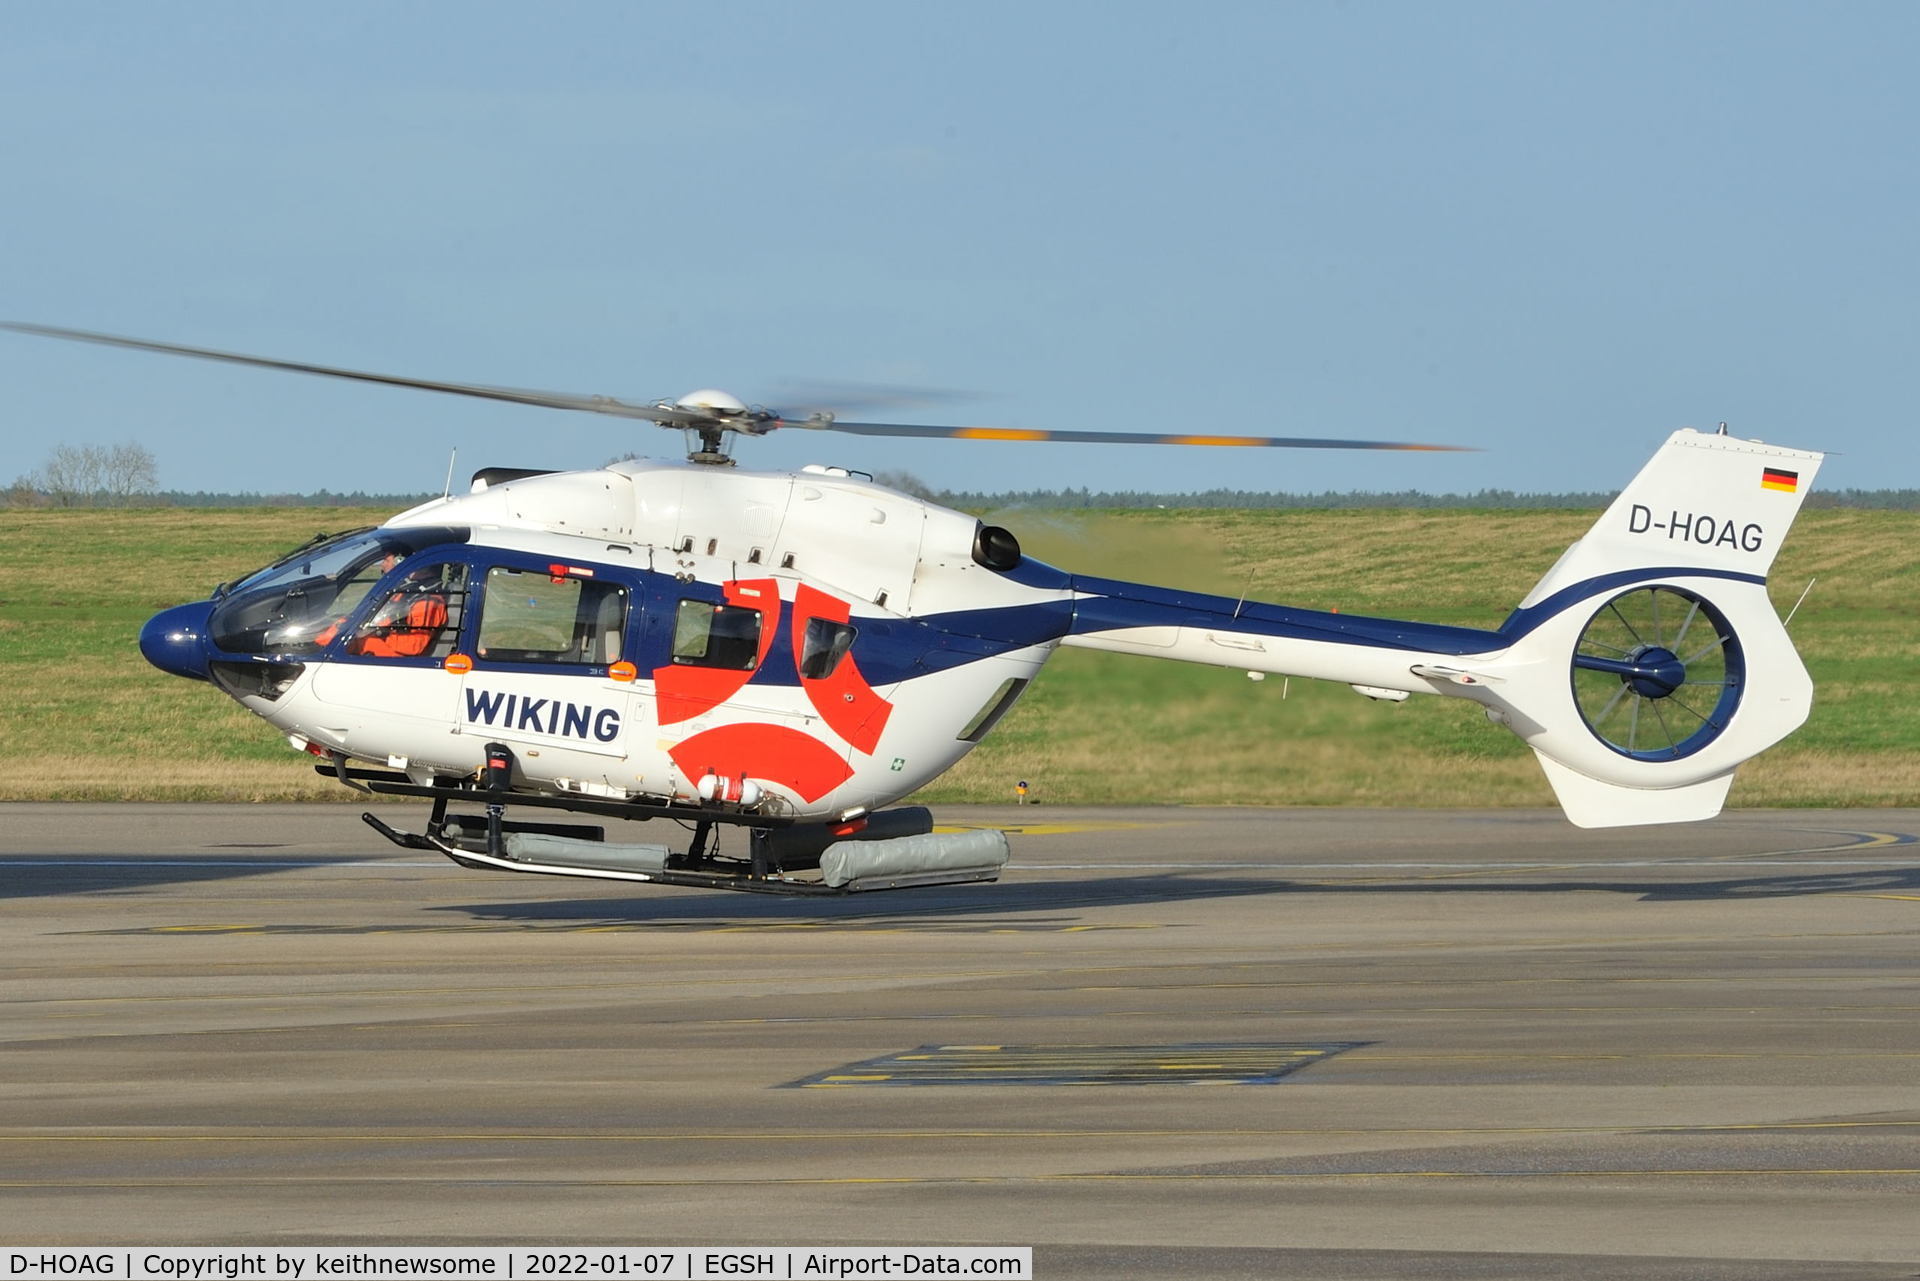 Aircraft D HOAG 2017 Airbus Helicopters H 145 BK 117D 2 C N 20178 Photo by keithnewsome 